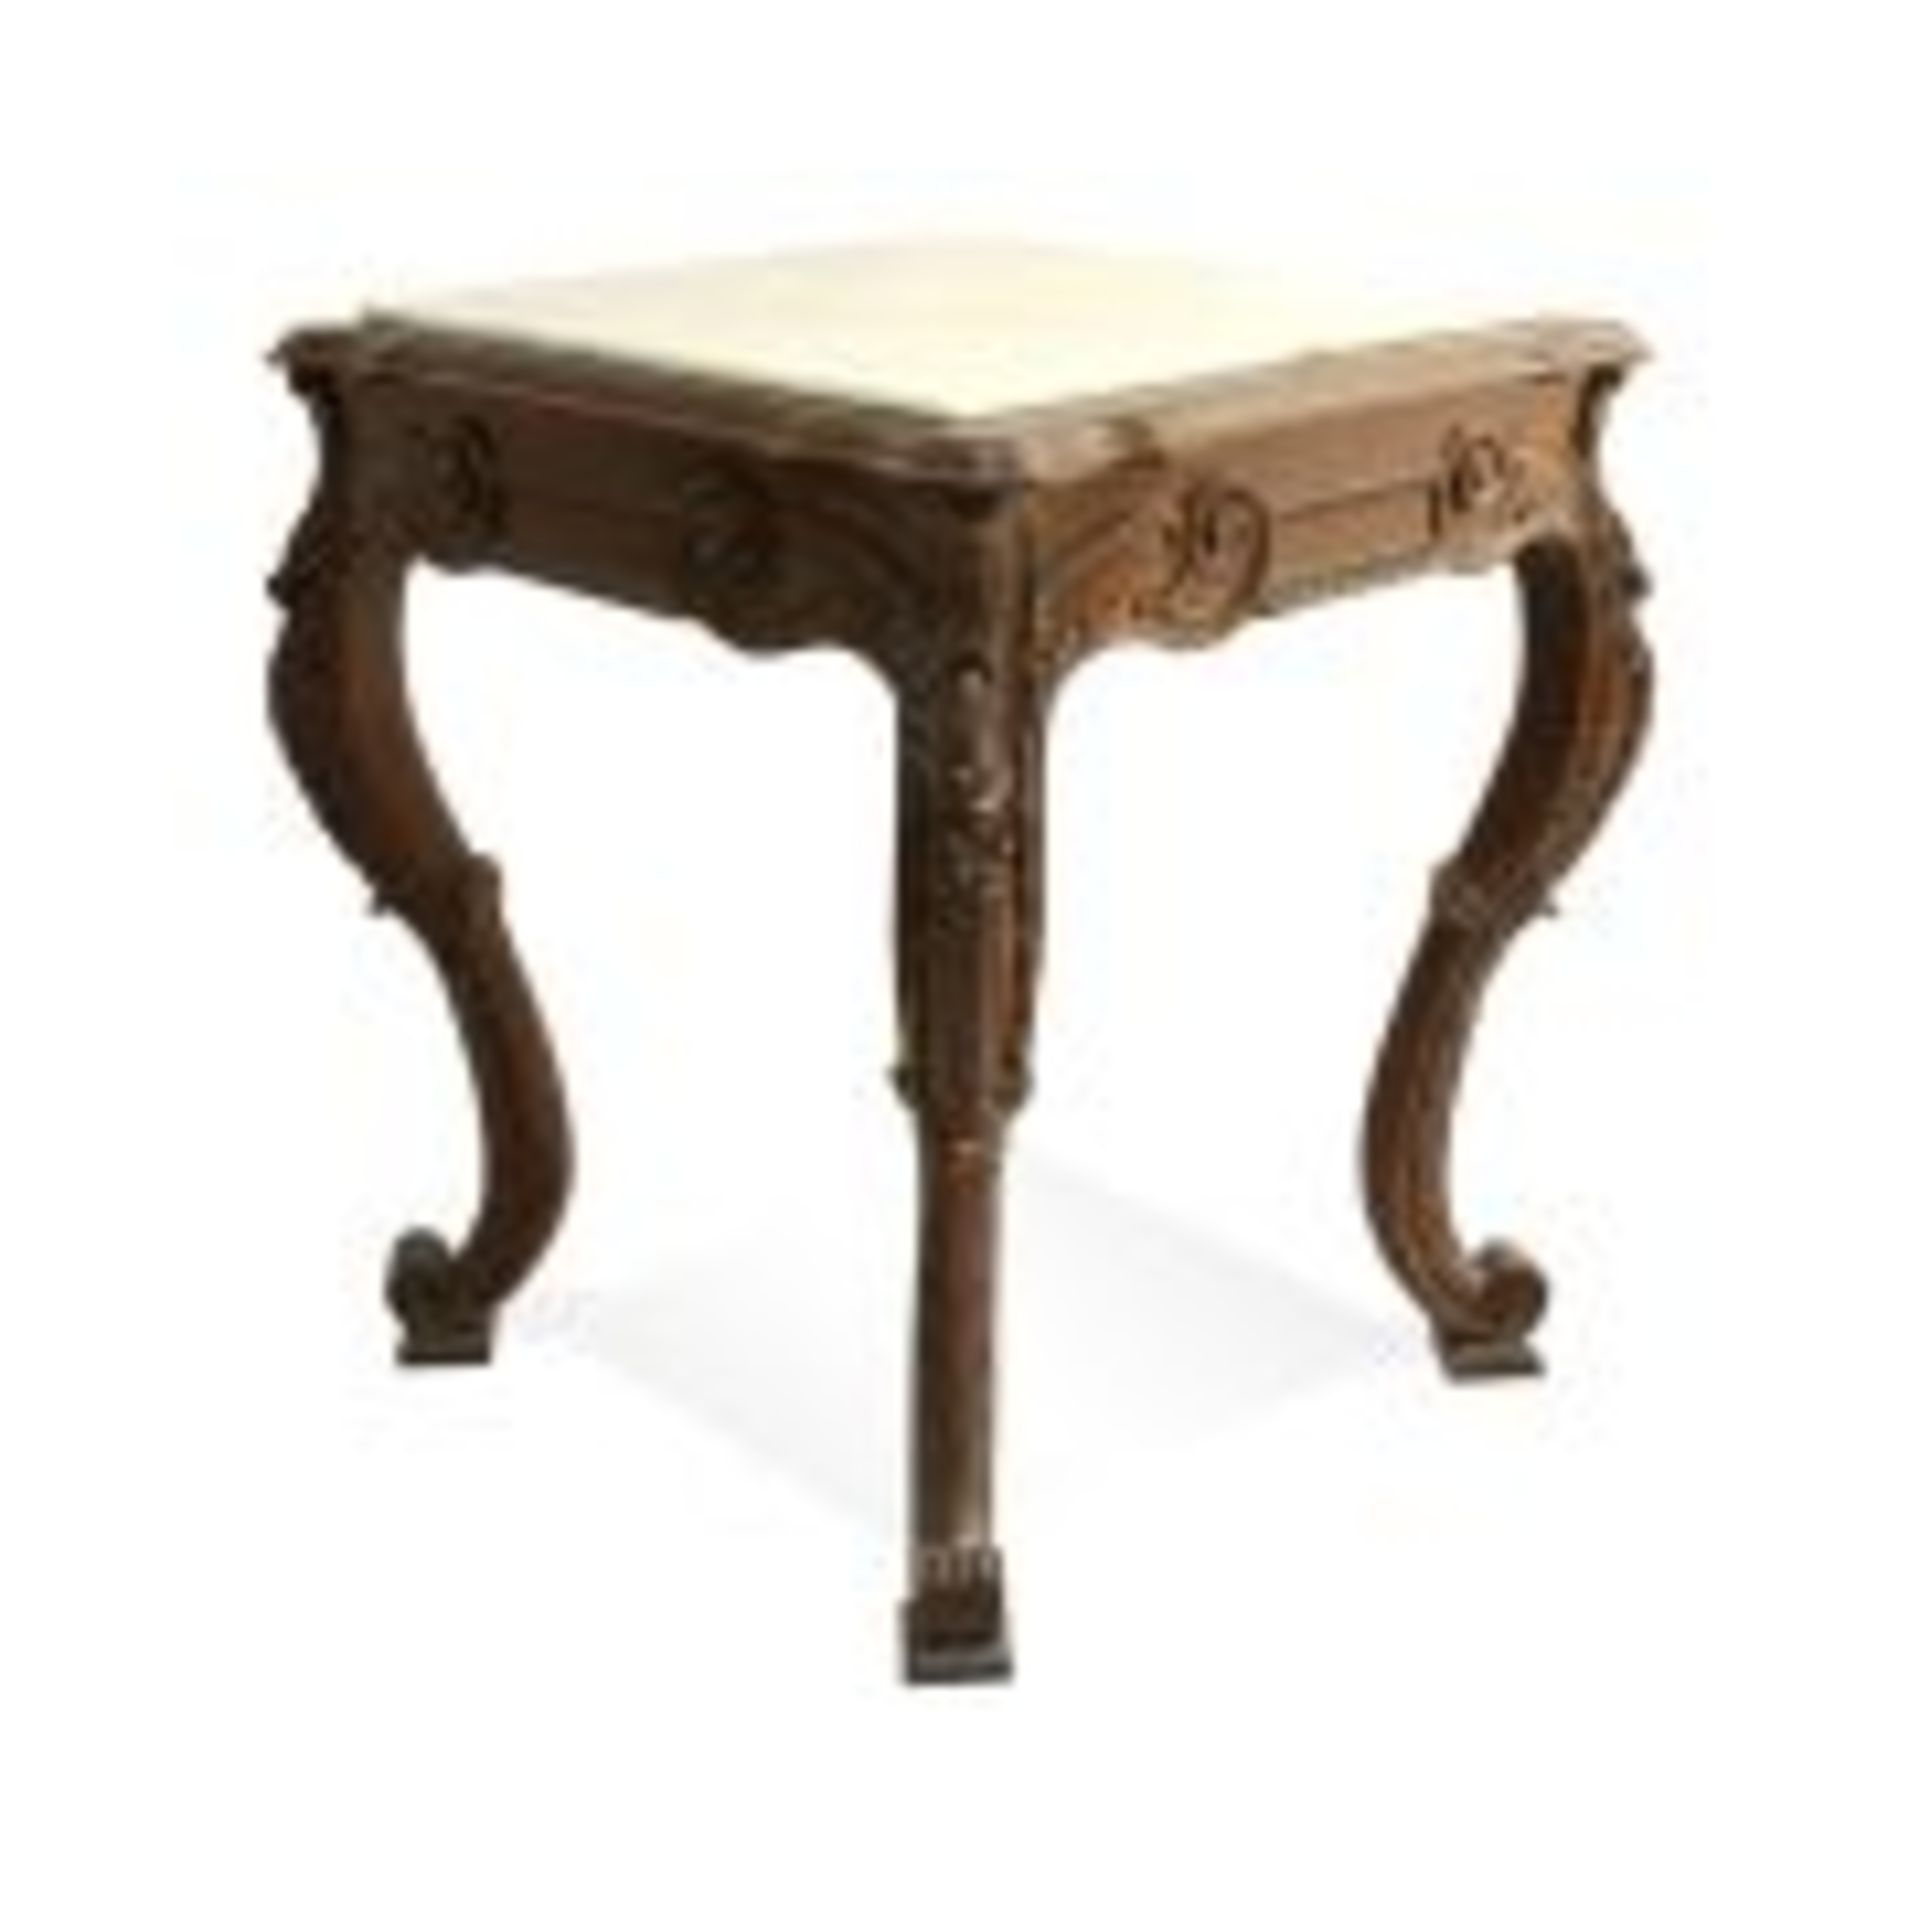 ATHENA ACCENT TABLE, SOLID KILN-DRIED HARDWOOD FRAME CONSTRUCTION W/ DOUBLE-DOWELLED AND CORNER - Bild 3 aus 3